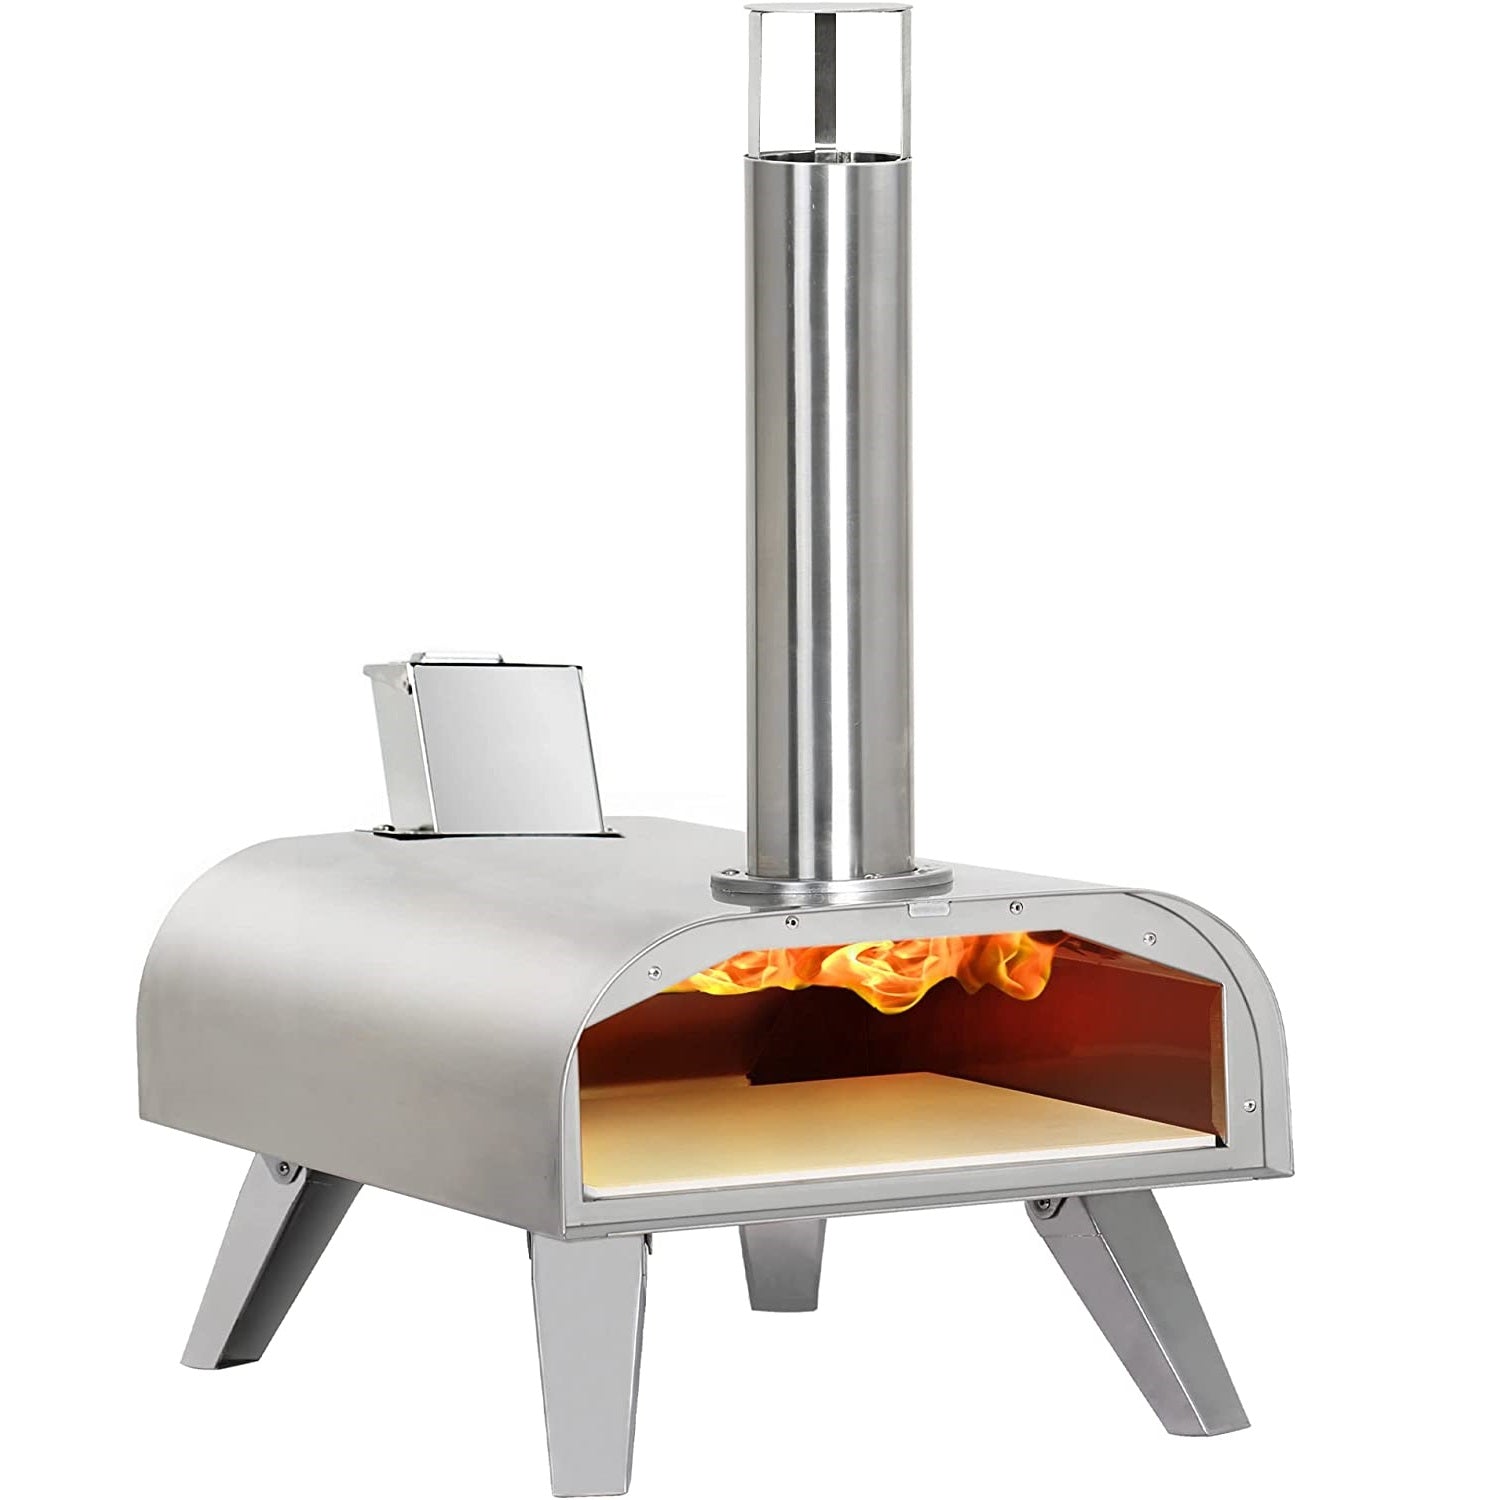 PizzaPal Oven - Effortless Homemade Pizza